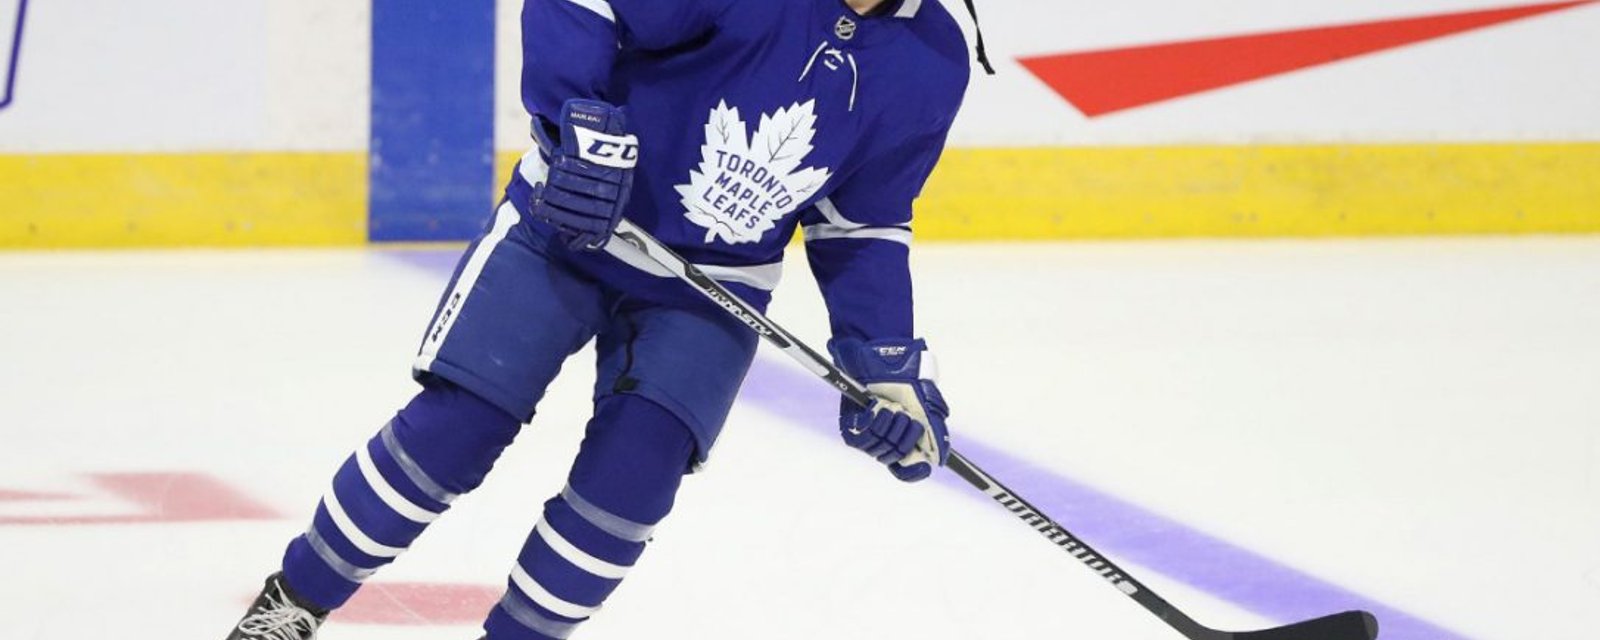 Report: Patrick Marleau is a bit cold lately